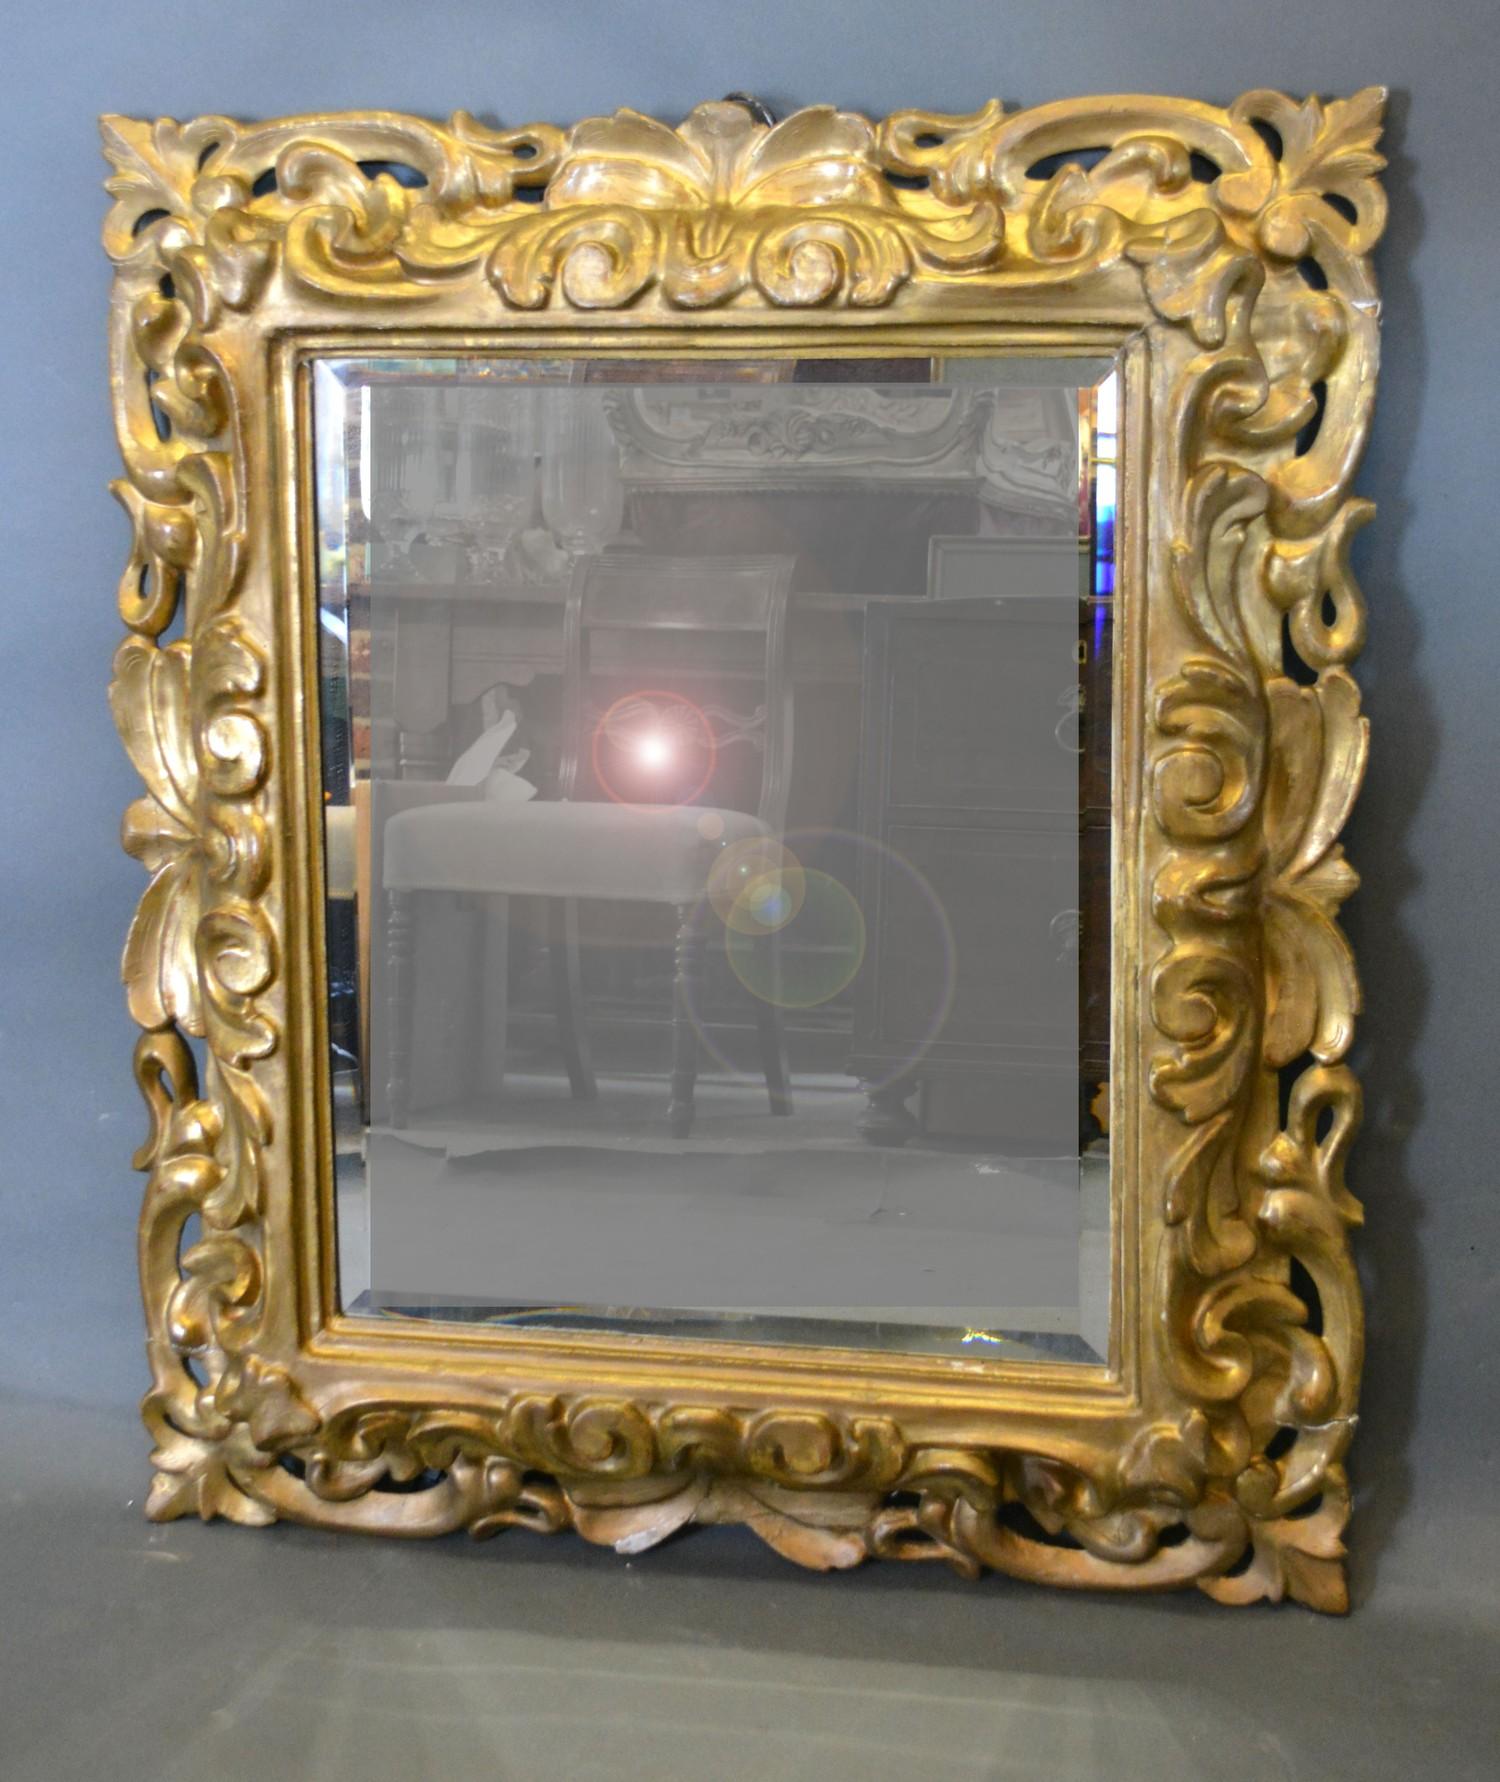 A 19th Century Giltwood Cushion Mirror with scroll carved and pierced frame, 90 x 77 cms